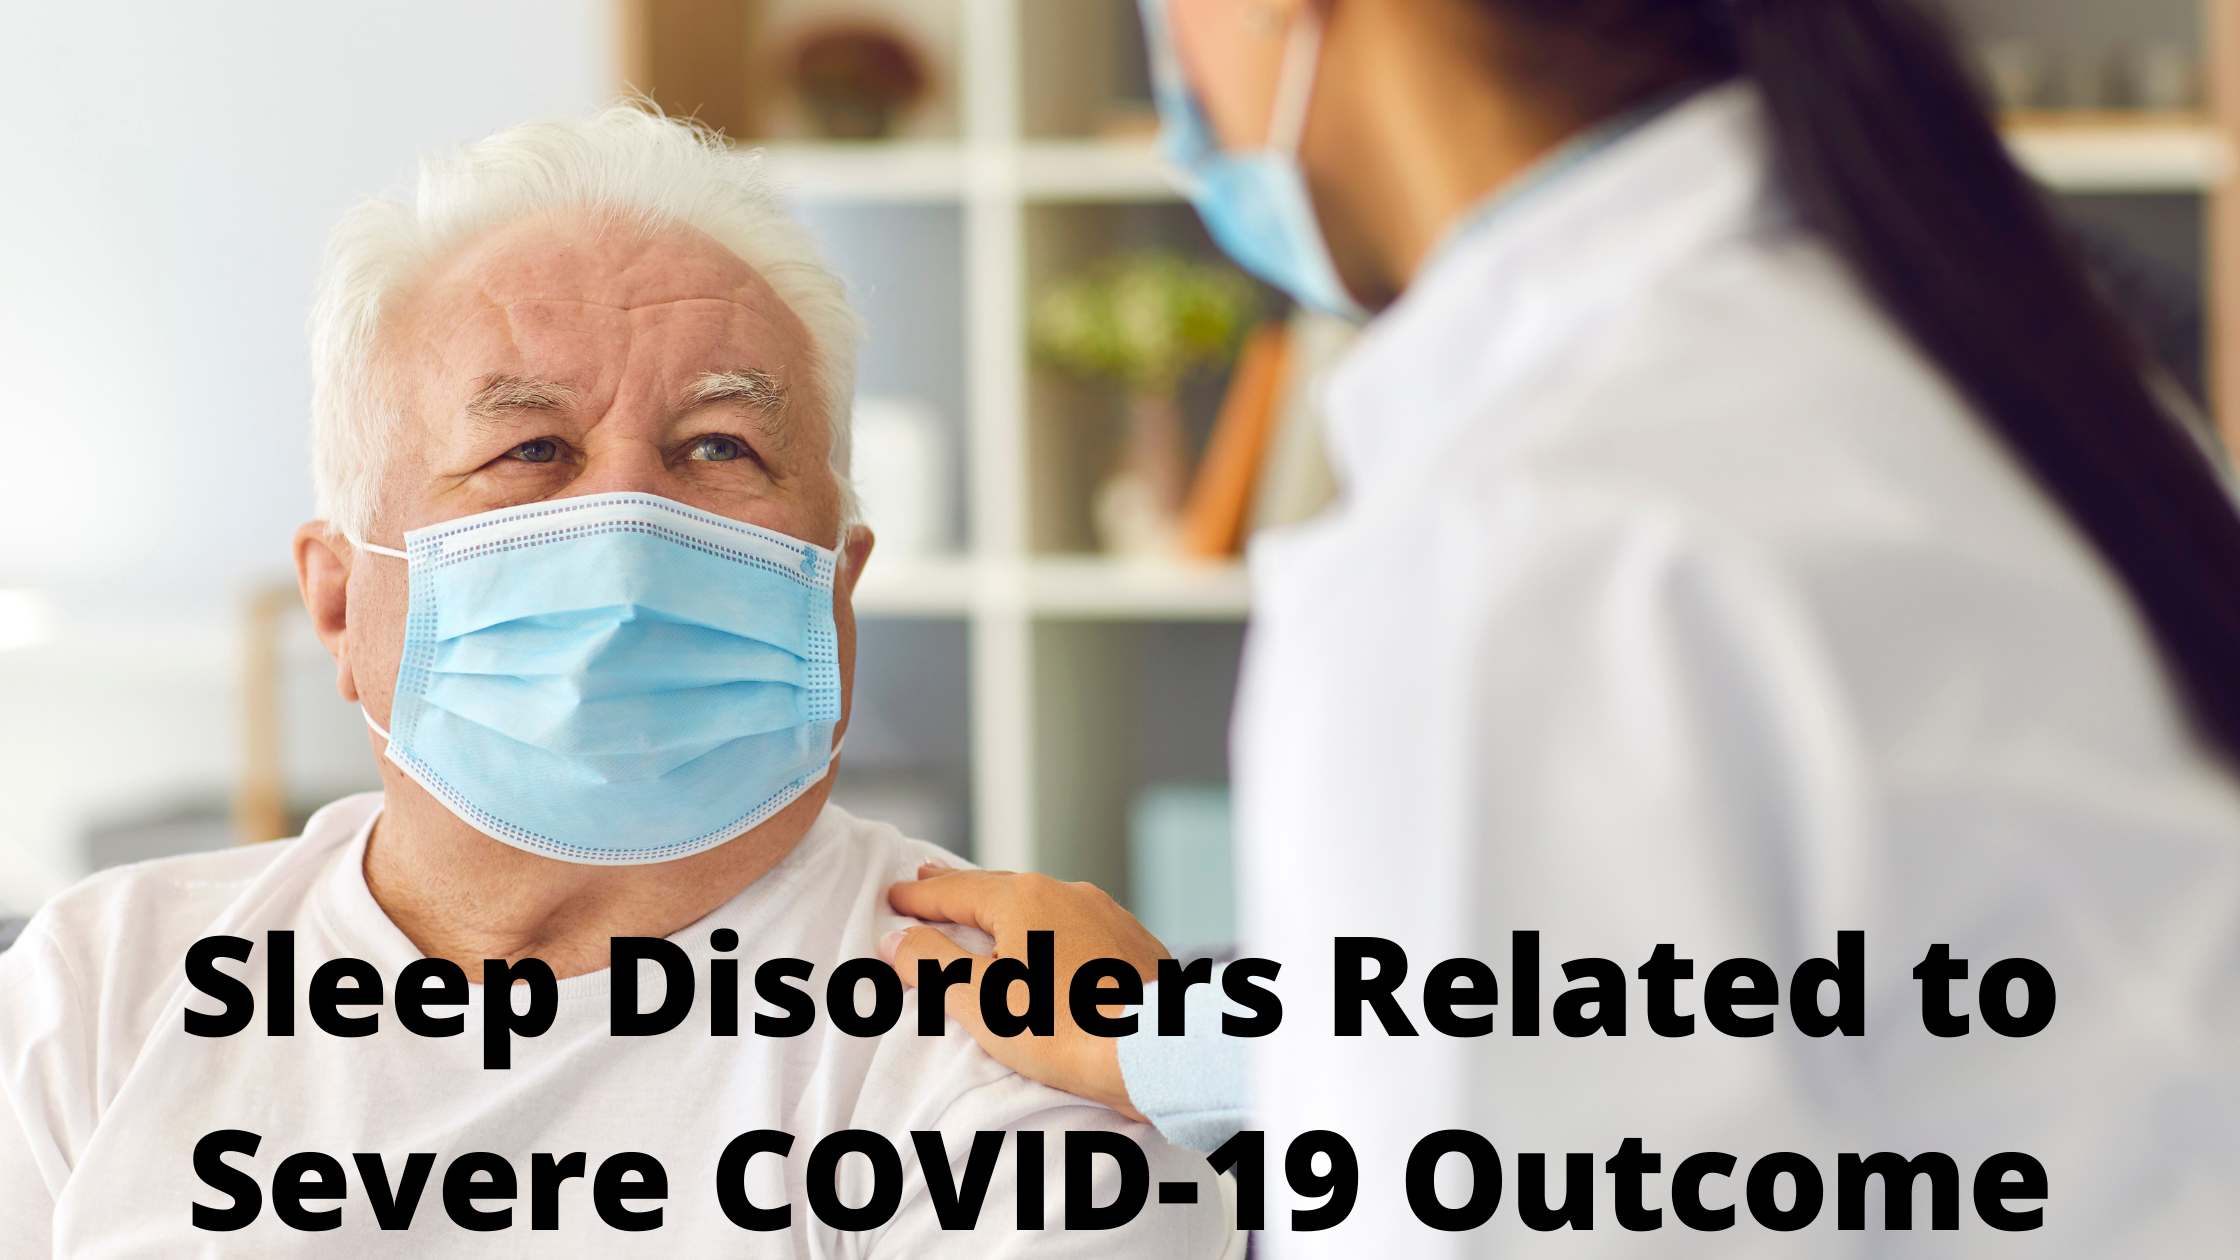 Sleep Disorders Related to Severe COVID-19 Outcome